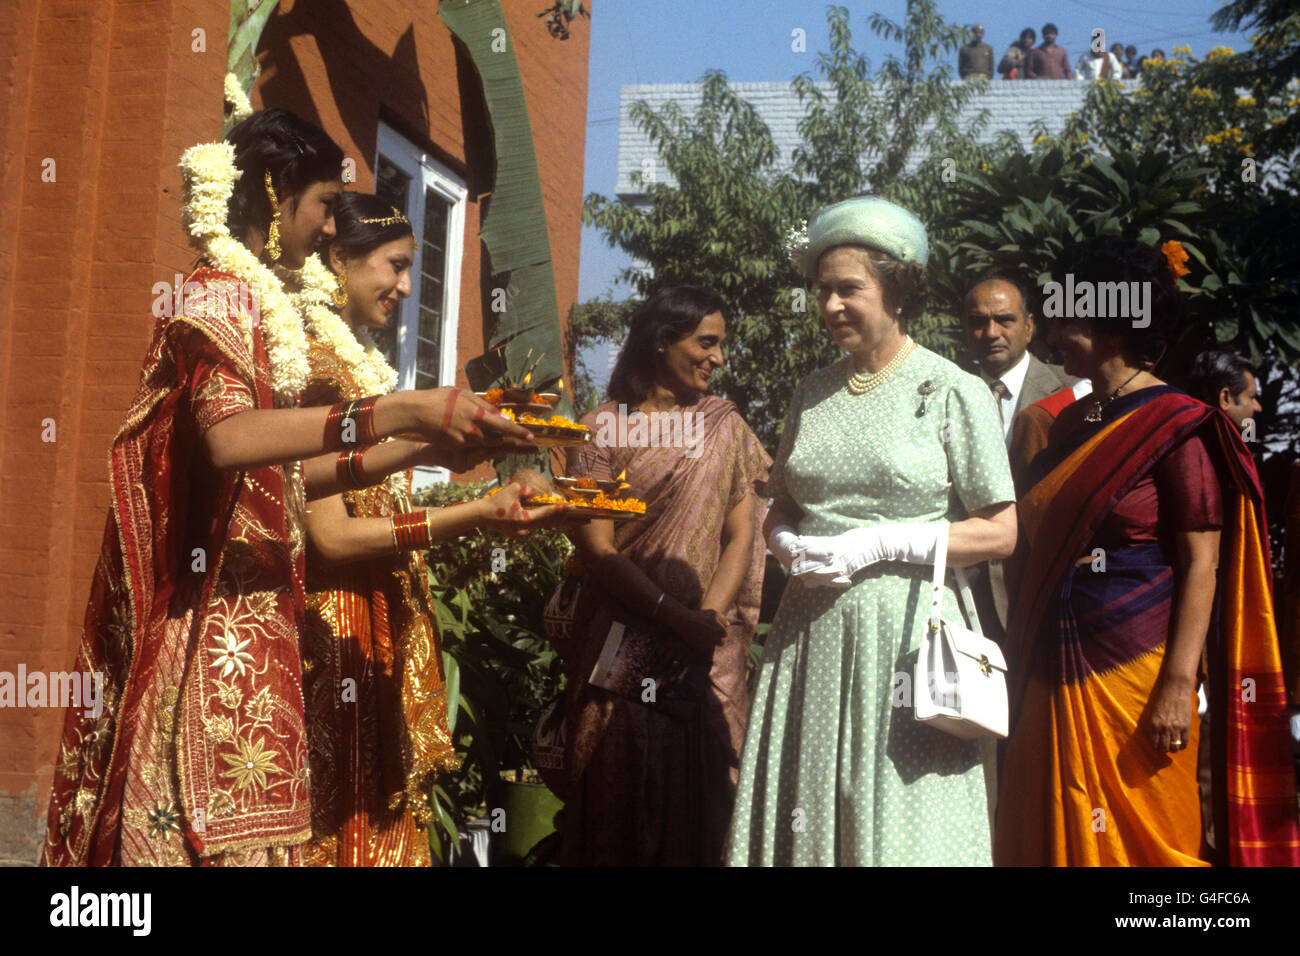 The Queen is offered food by girls in traditional Indian dress at the Mahatma Gandhi memorial at Raj Ghat, Delhi. Gandhi was cremated here following his assassination. This was the Queen's second visit to the site, the first was in 1961 when she planted a tree. Stock Photo